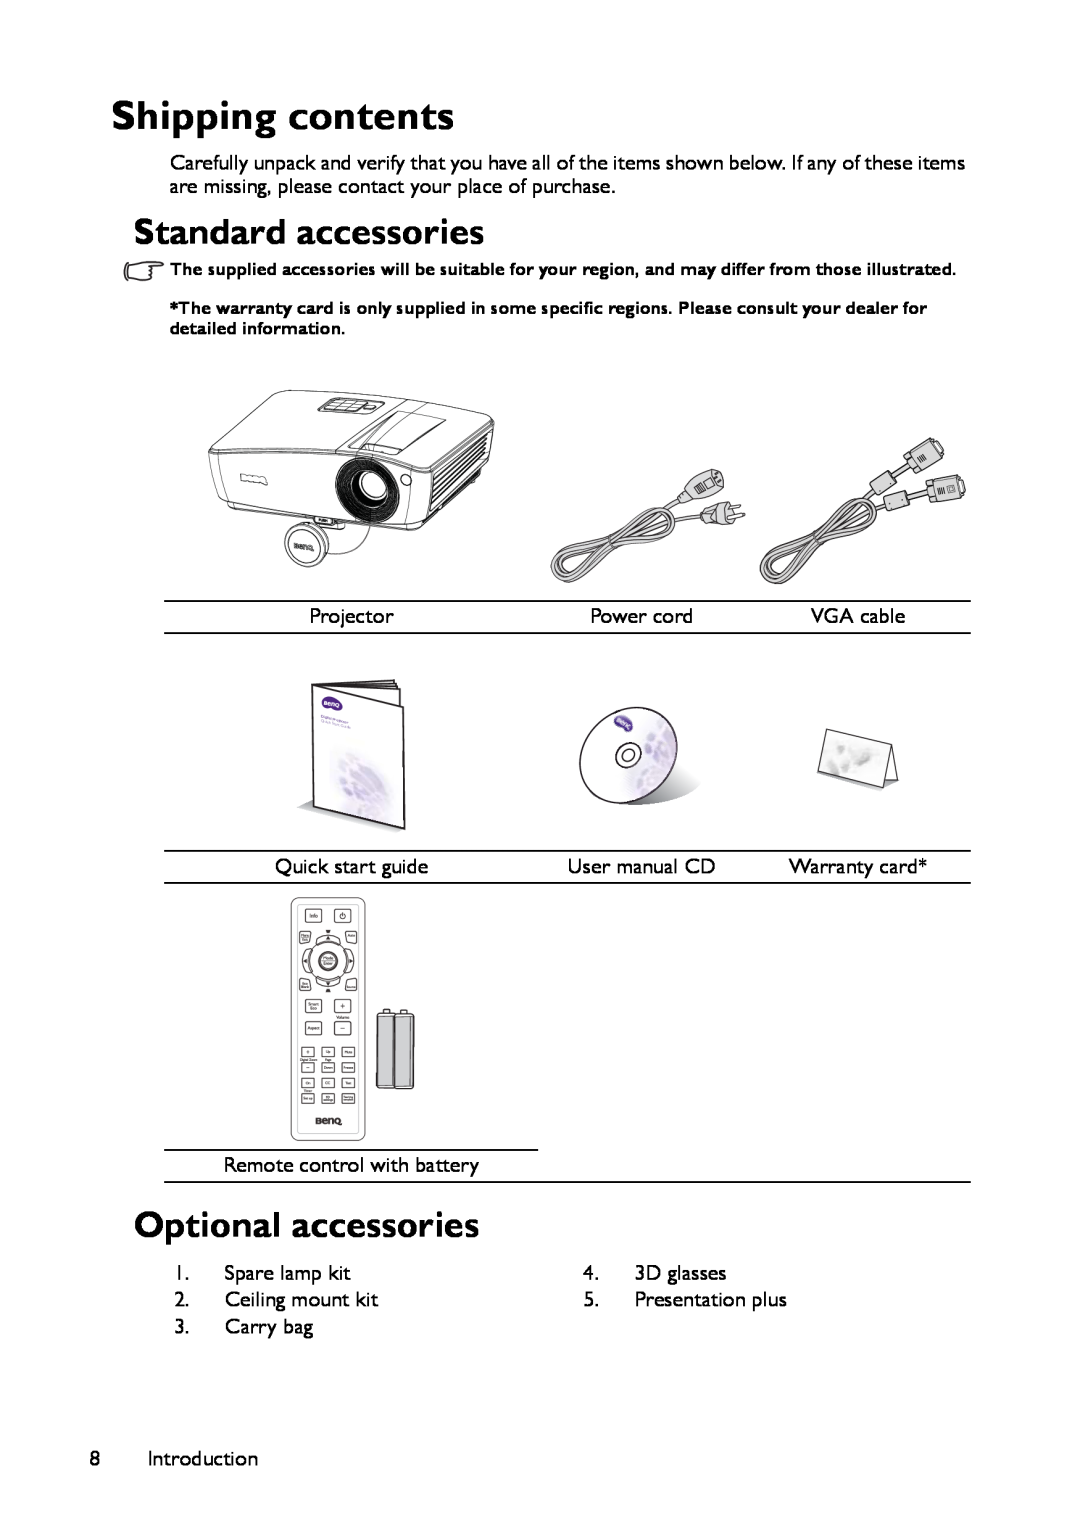 BenQ MX661 user manual Shipping contents, Standard accessories, Optional accessories 